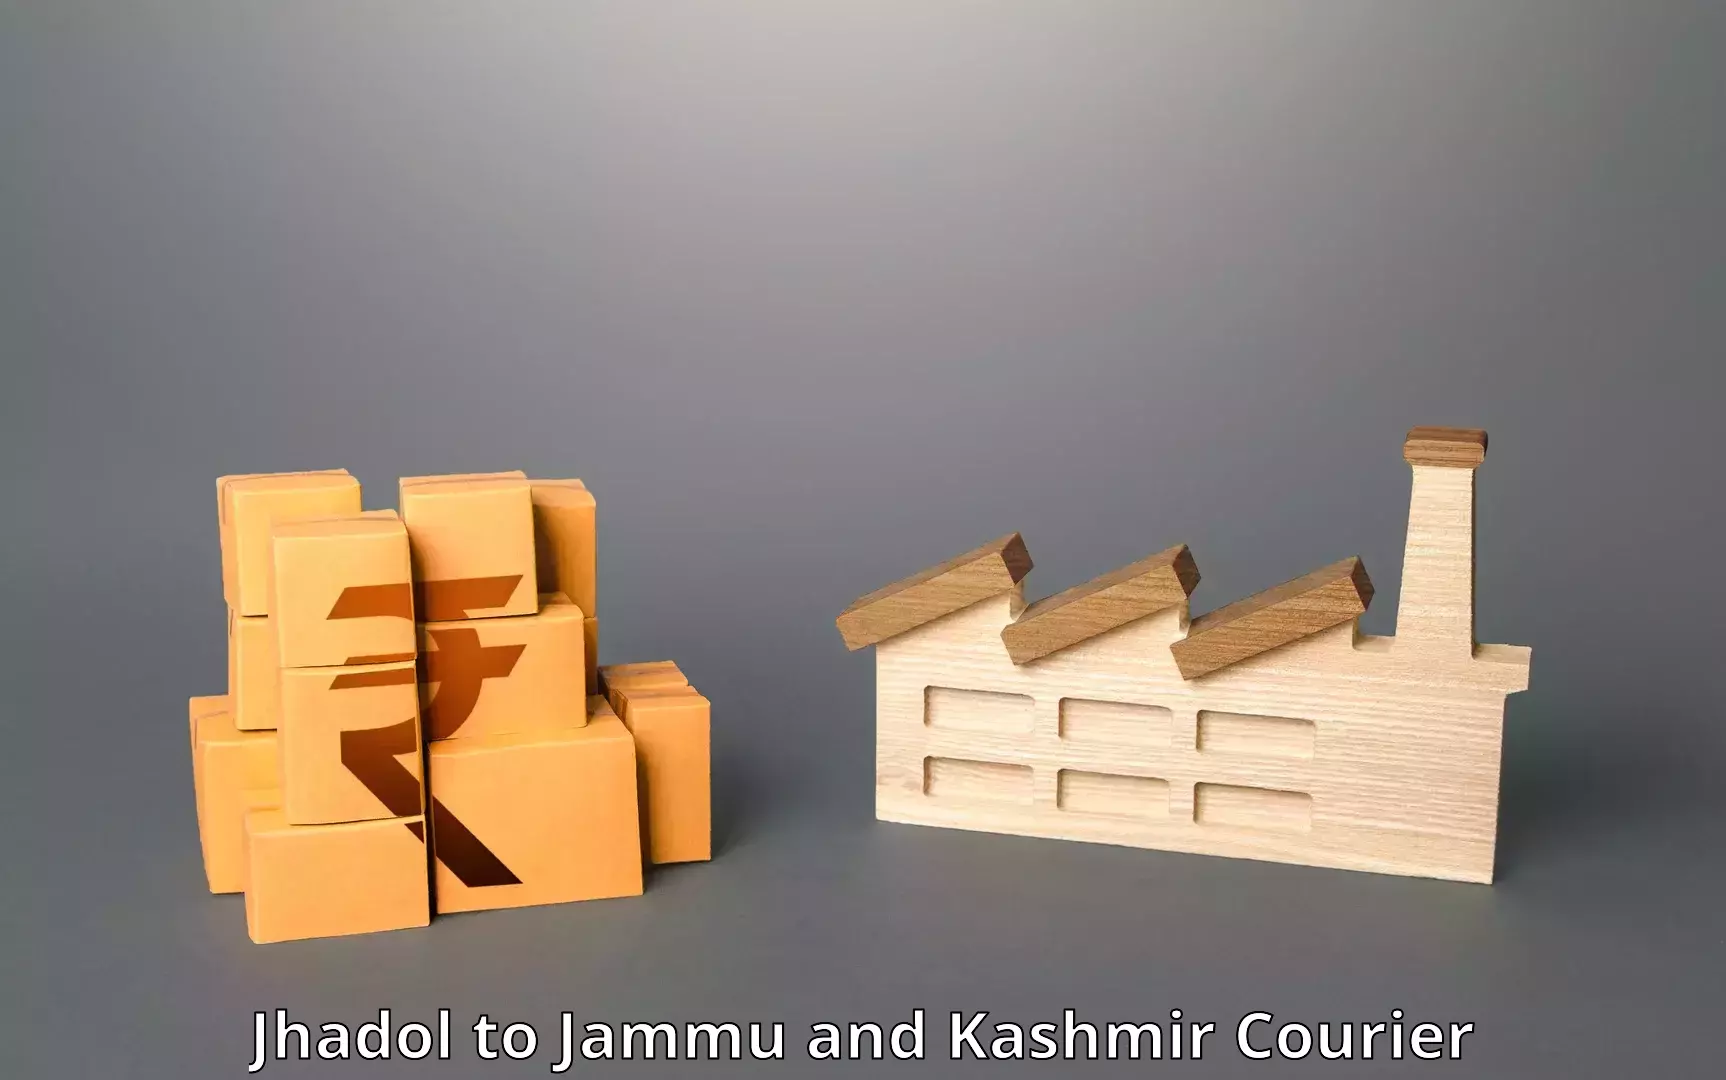 Professional courier handling Jhadol to University of Jammu